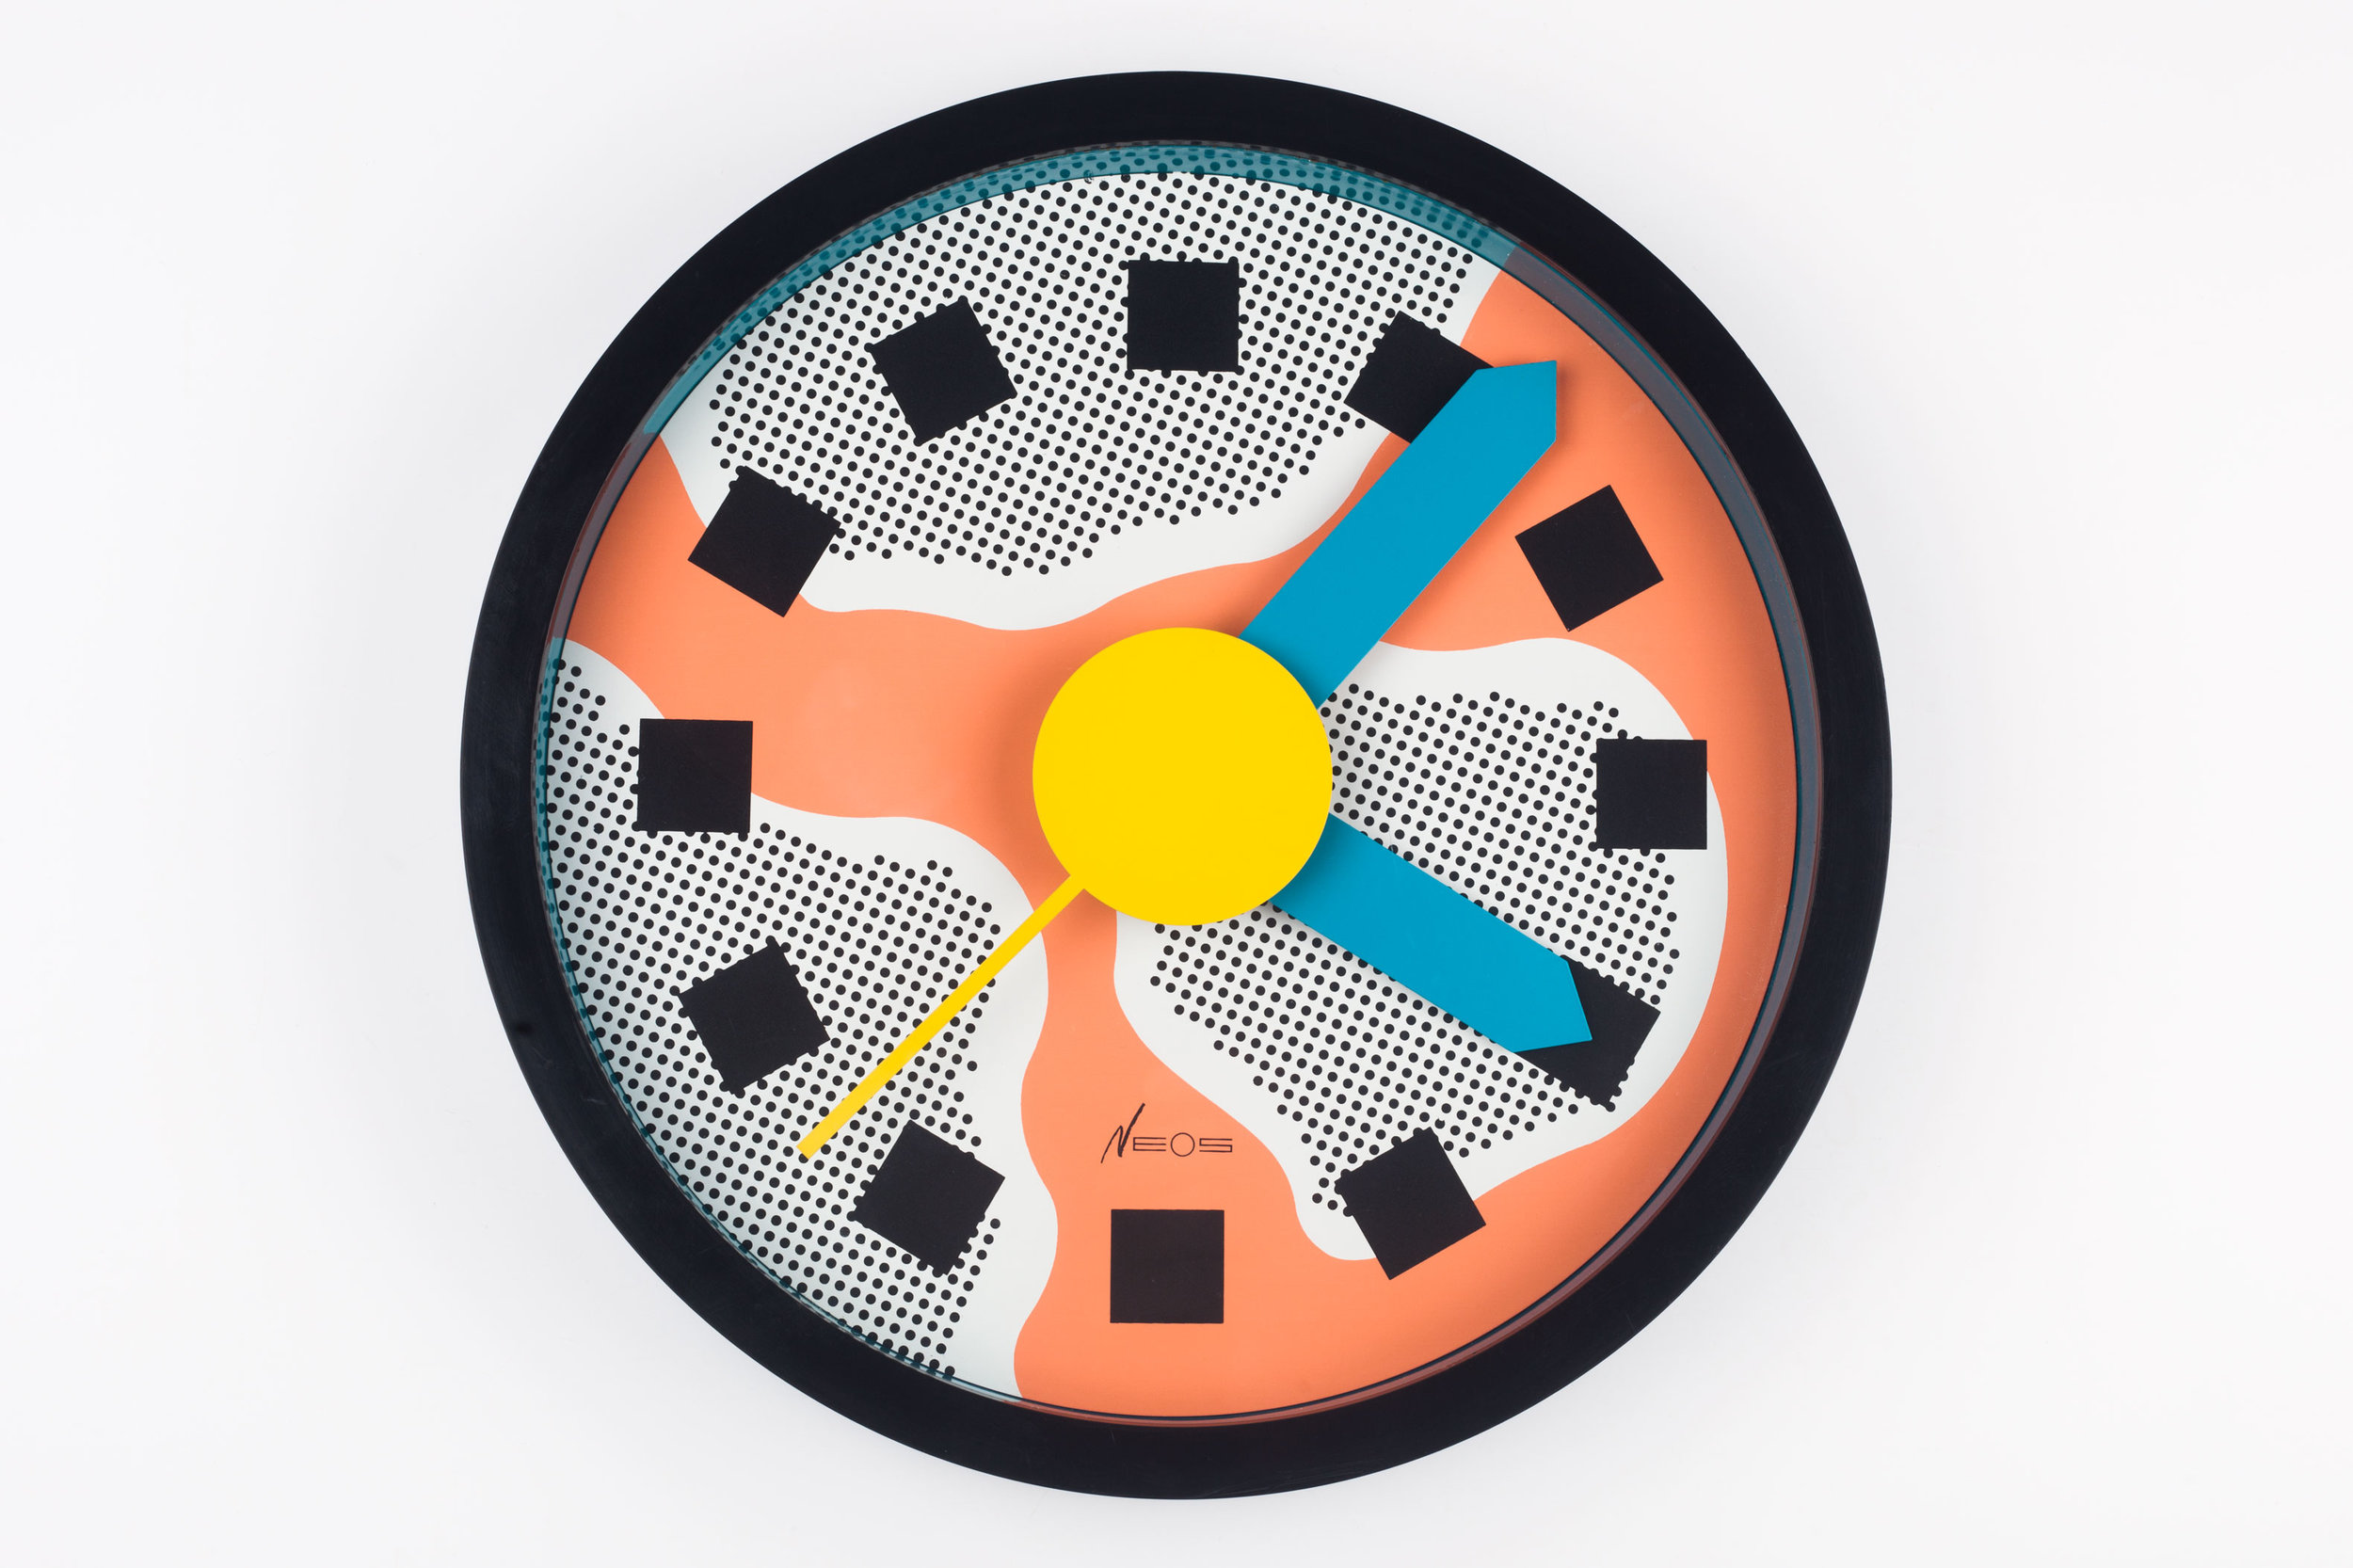 MEMPHIS WALL CLOCK, DU PASQUIER AND SOWDEN FOR NEOS, POP ART STYLE, ITALY, 1988